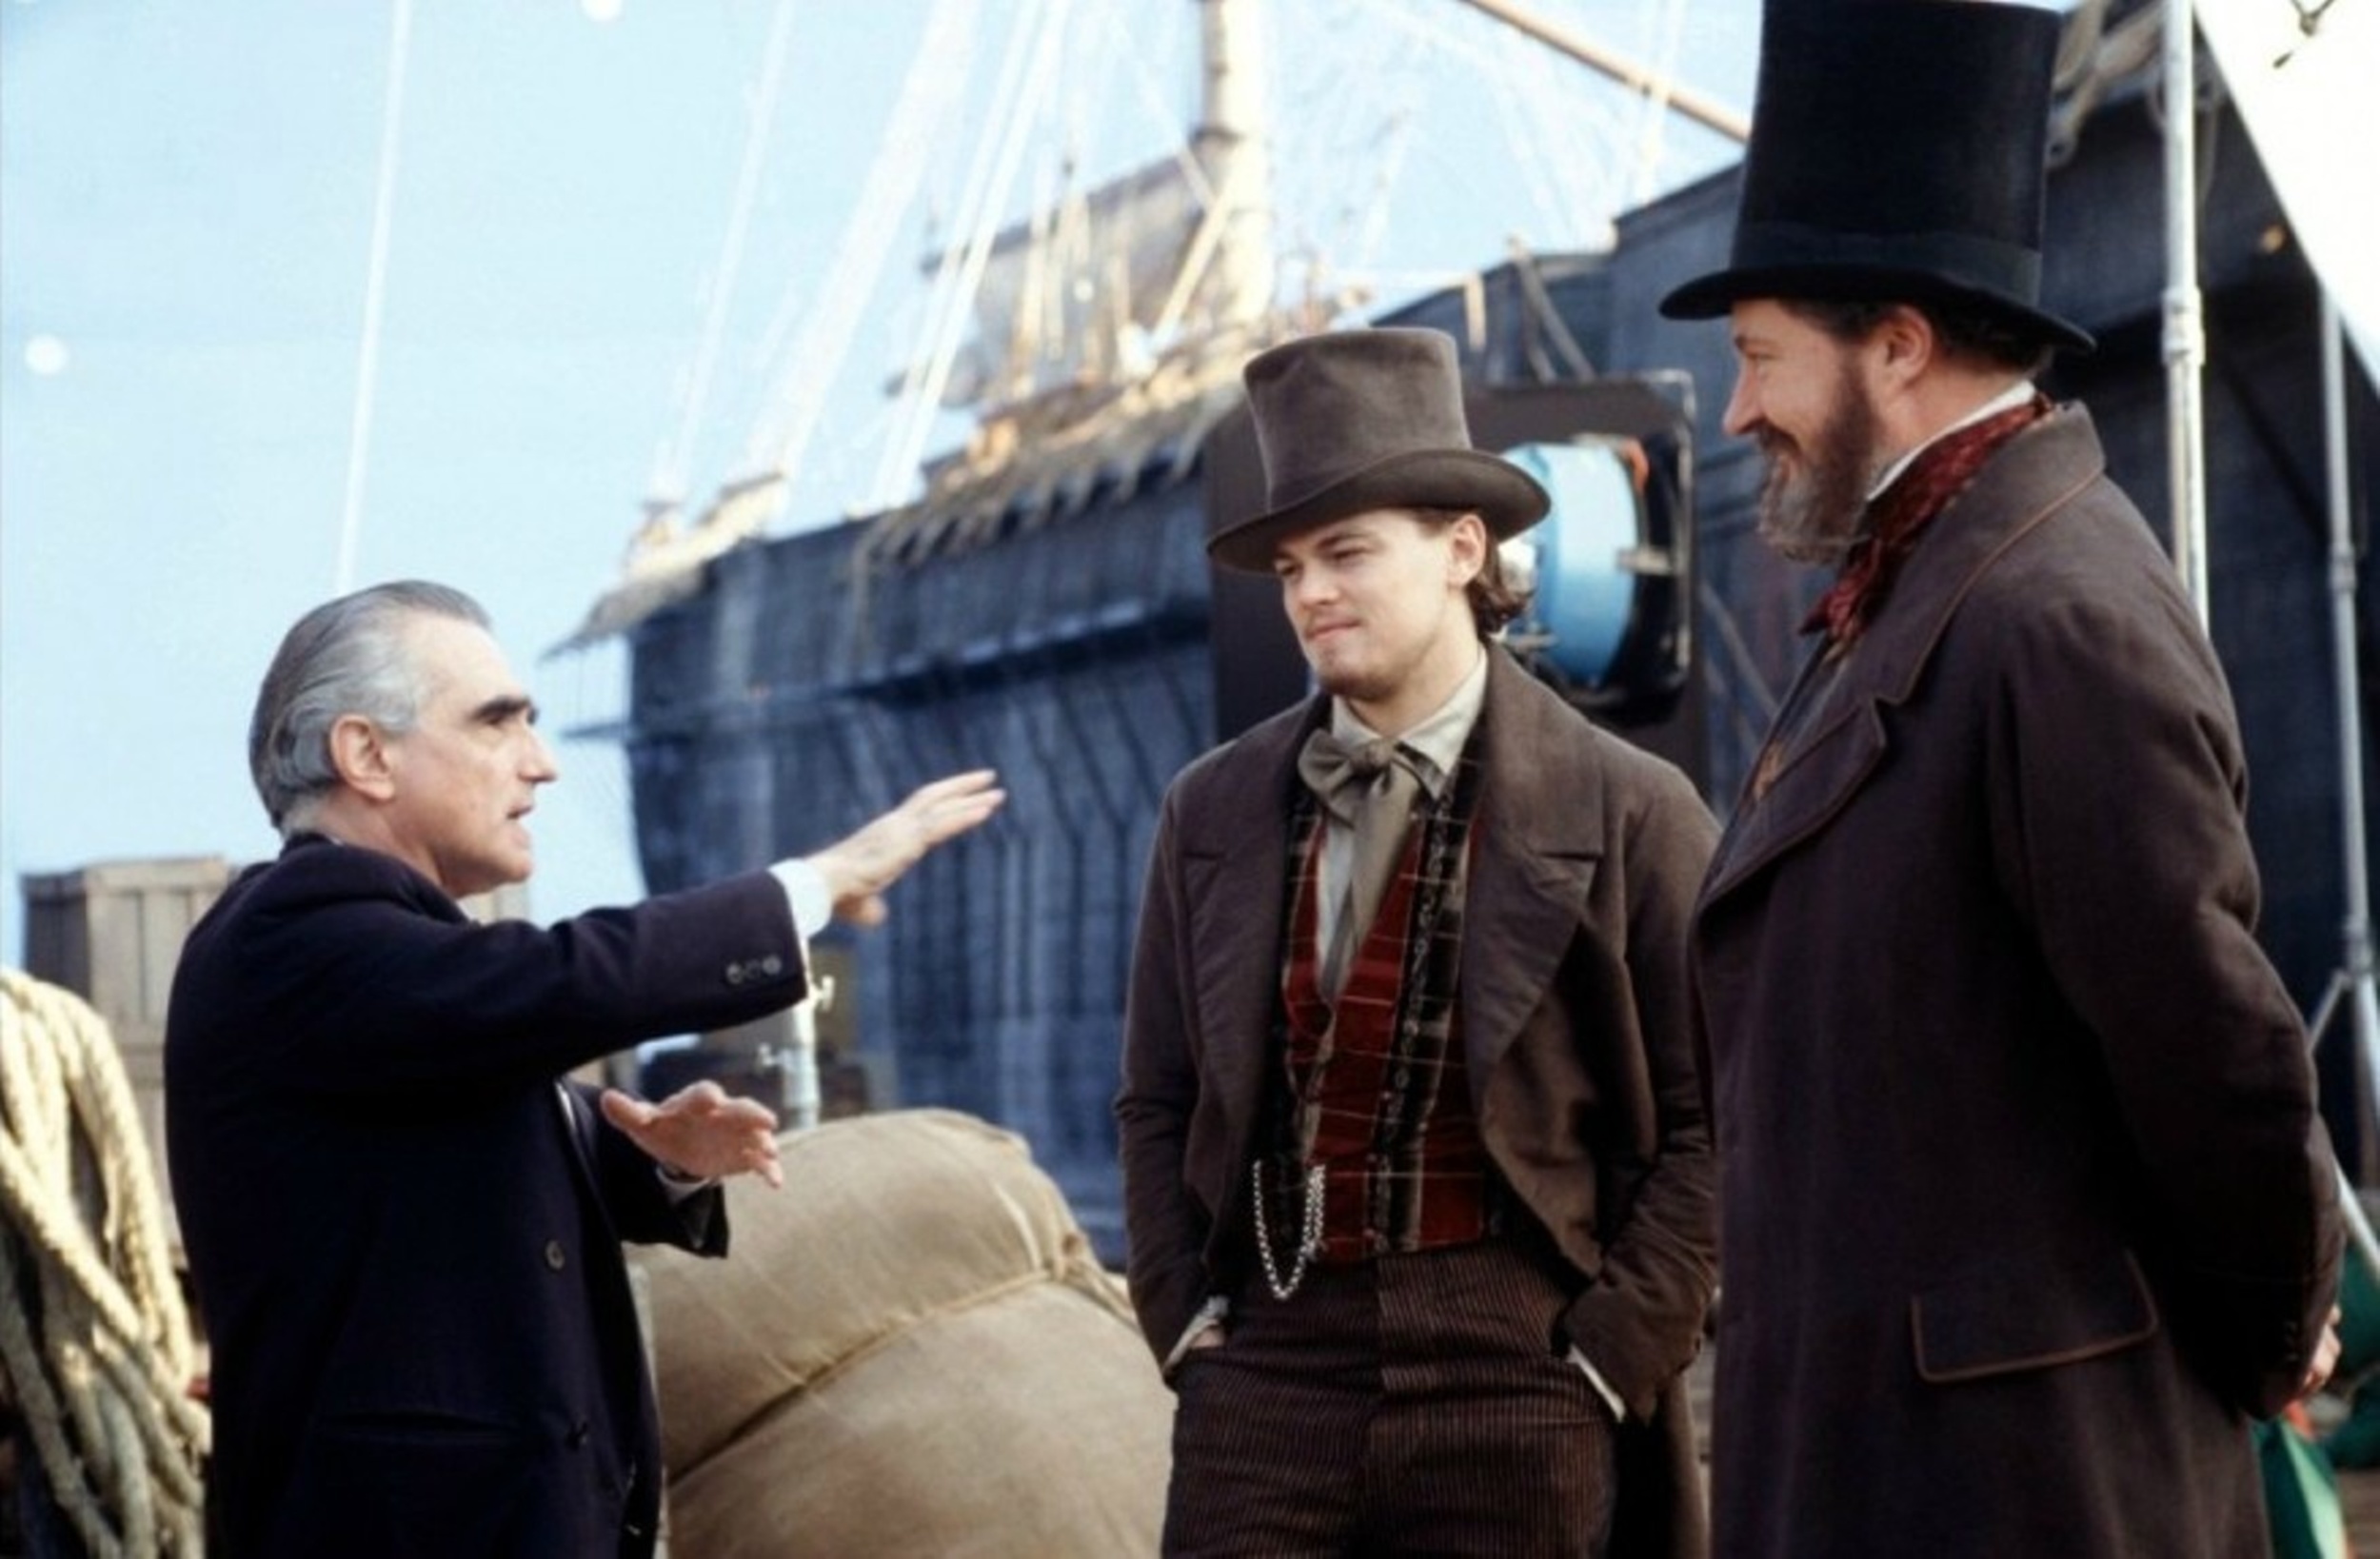 <p>As he was starting his film career, Scorsese got his hand on a copy of the book <em>The Gangs of New York: An Informal History of the Underworld</em>. Herbert Ashbury wrote it in 1927 when the information was much fresher. This got him thinking about making an American epic out of it.</p>